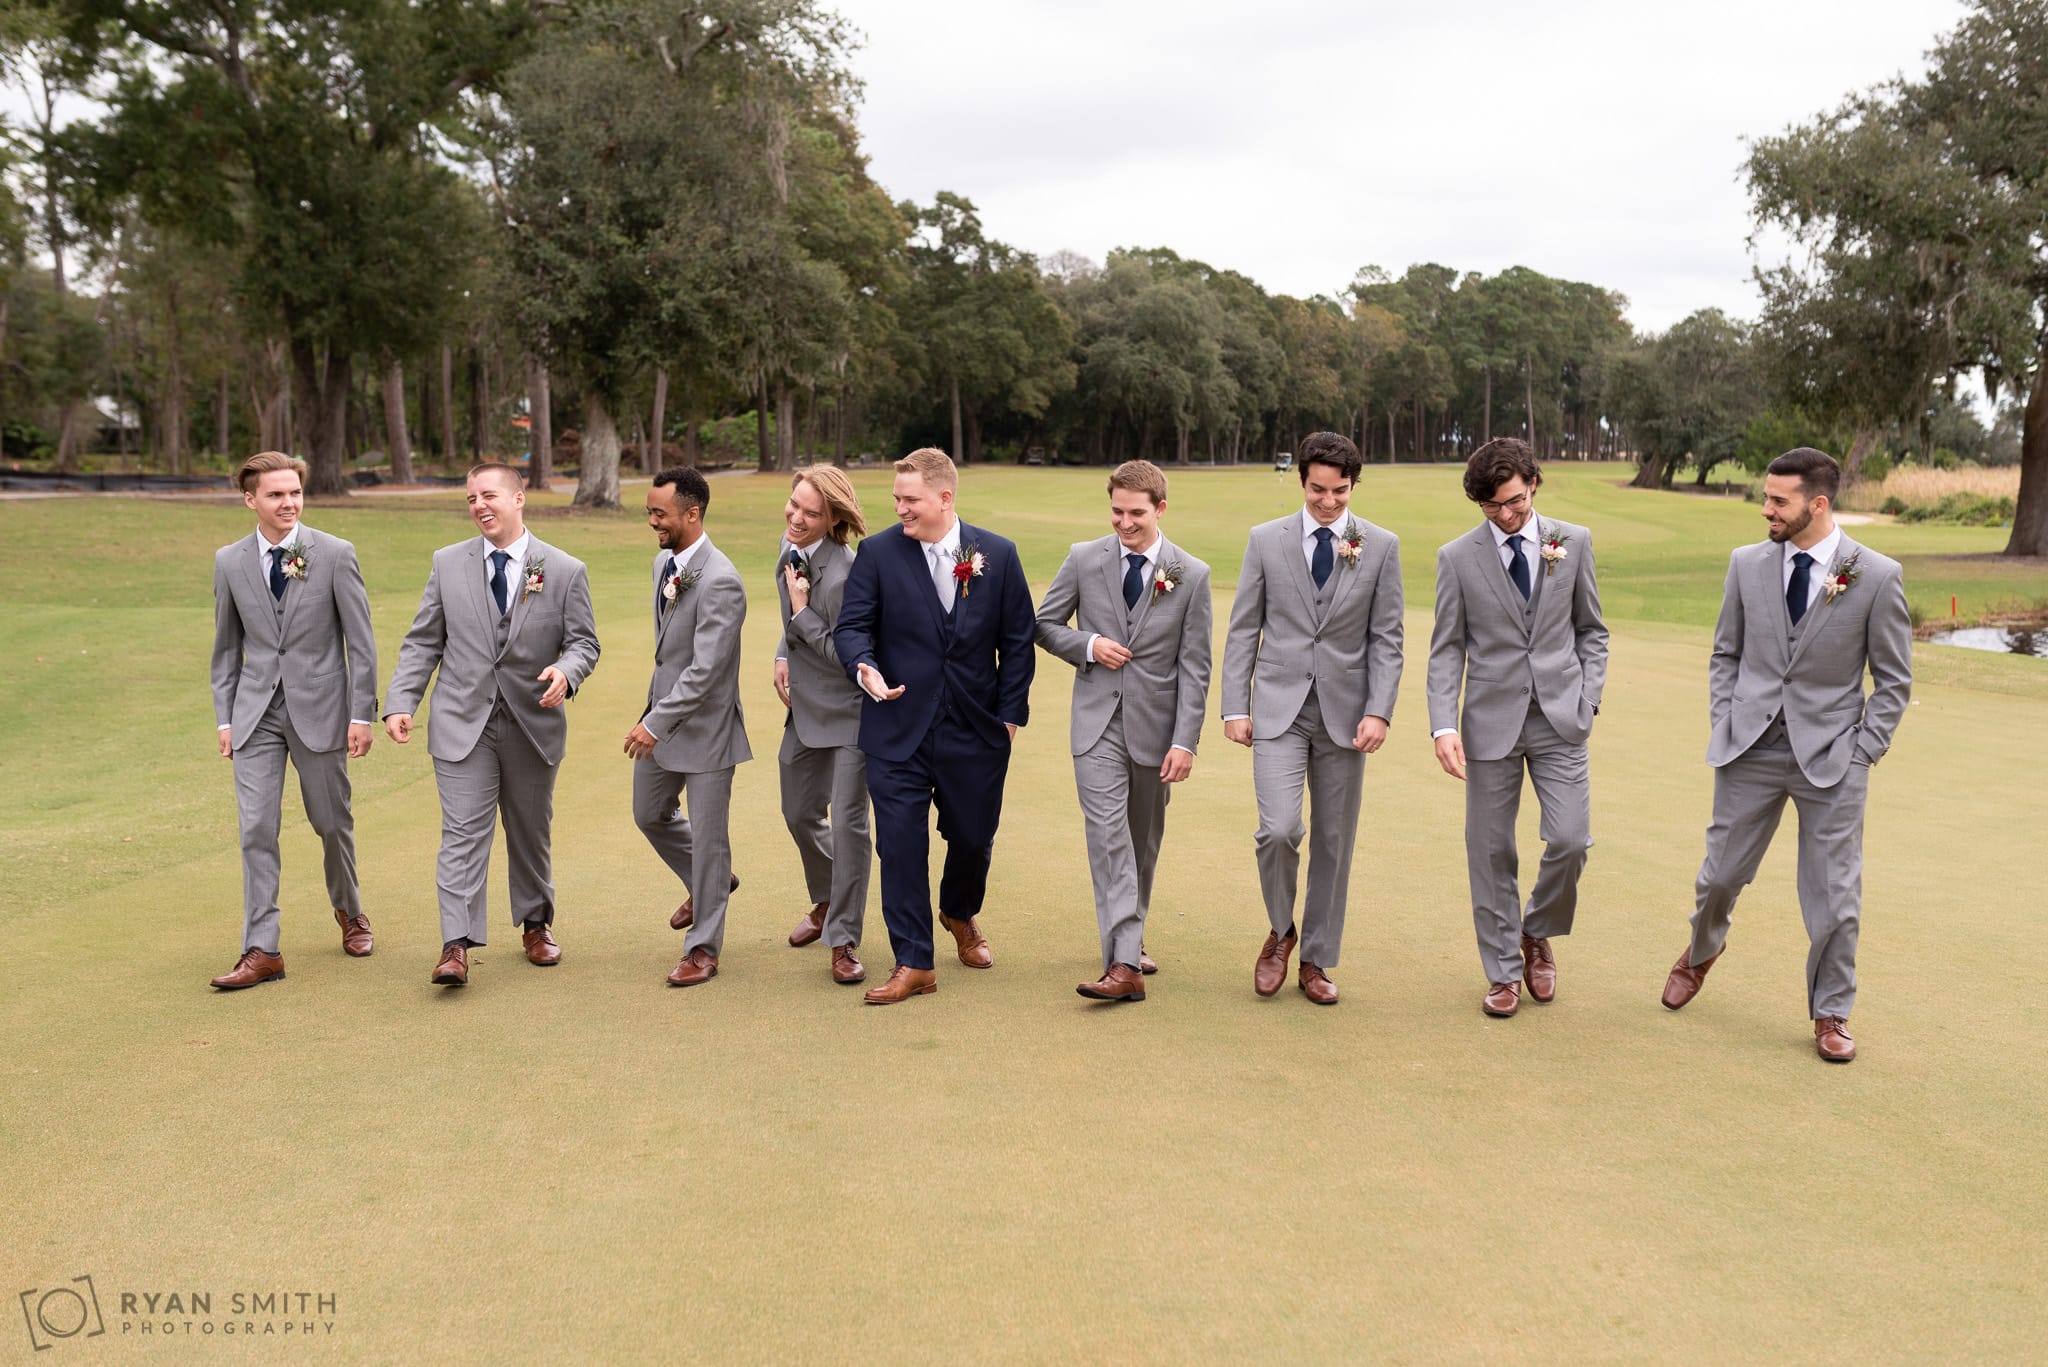 Groomsmen walking down the golf course and talking